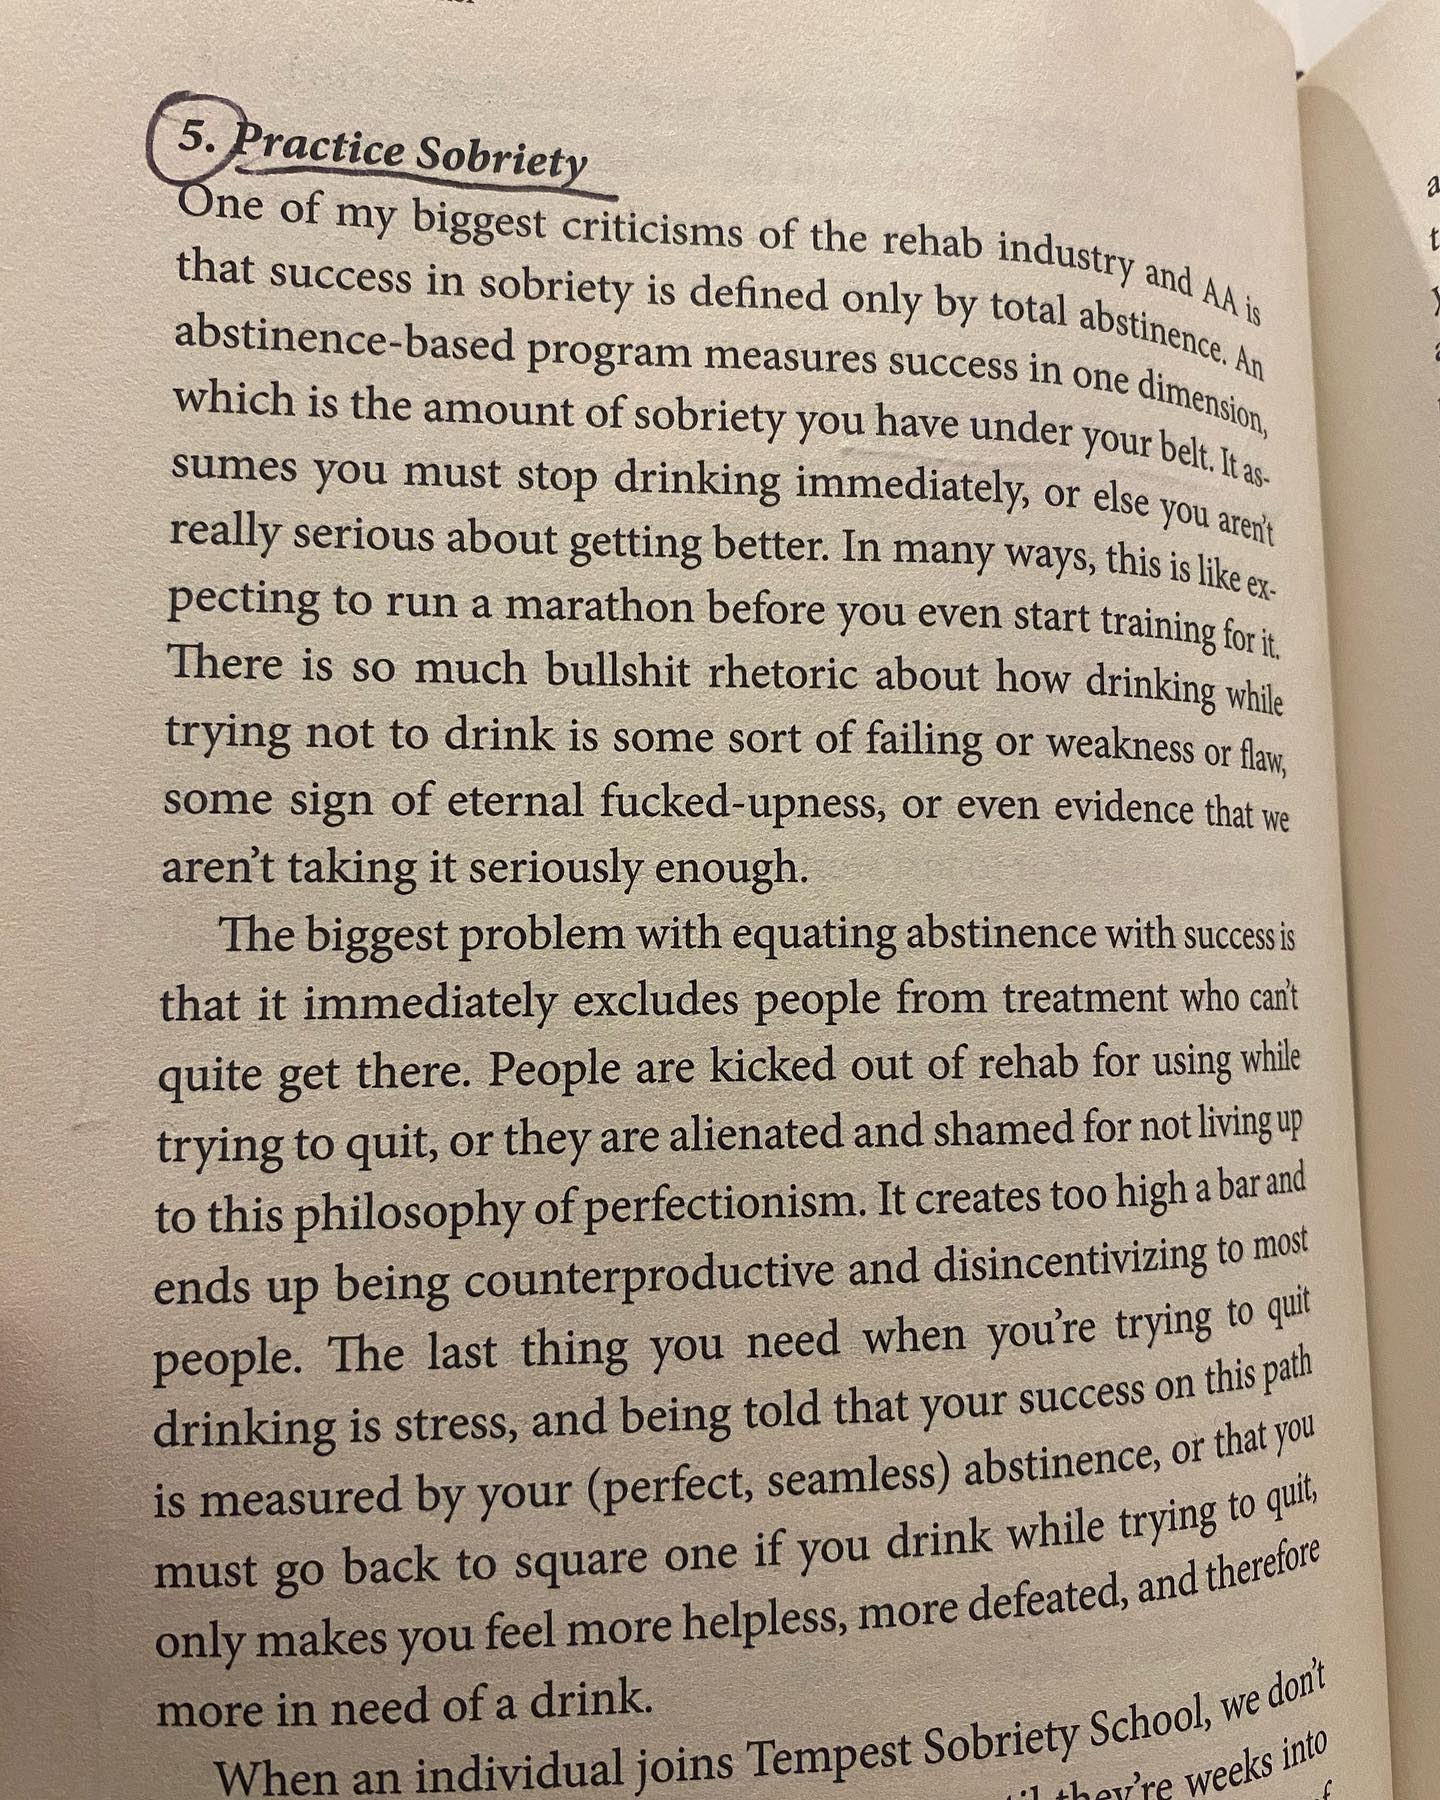 Holly Whitaker in Quit Like A Woman on why we need to embrace practicing sobriety vs complete abstinence as the measure of progress and success. Quitting drinking is a process of trial and error and training - much like training for a marathon. You start with the Couch to 5K.